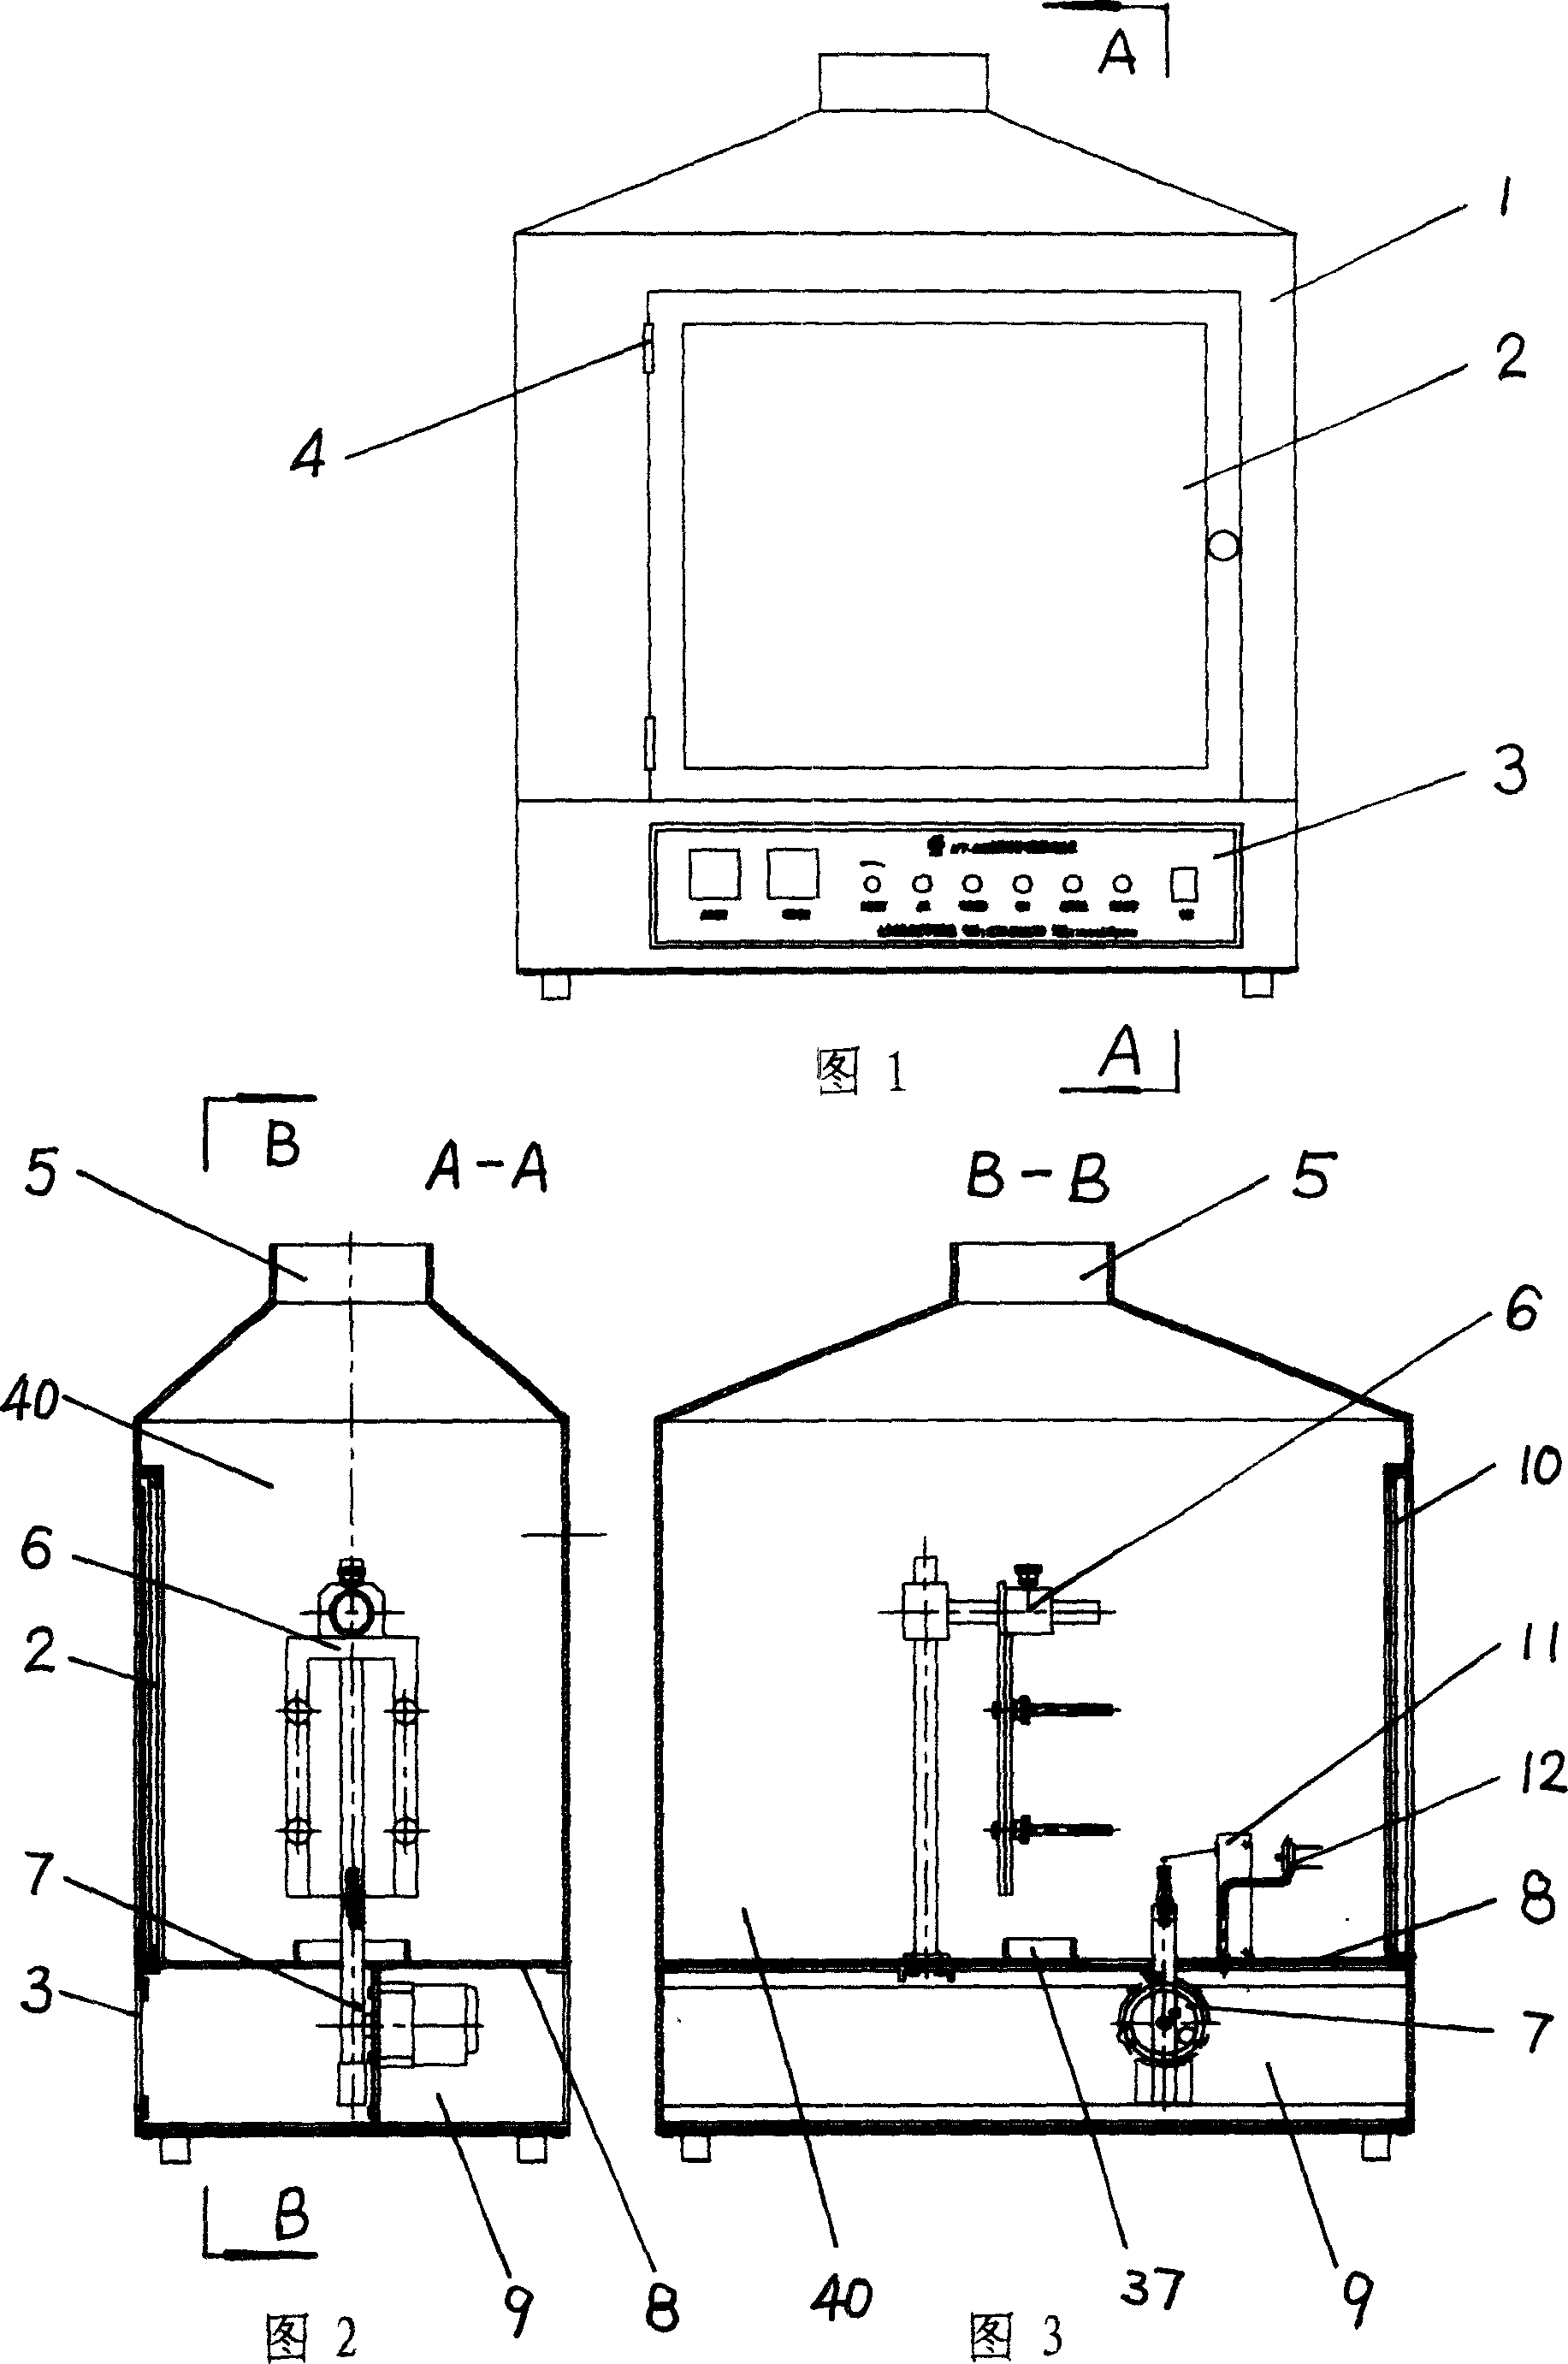 Construction materials flammability test device